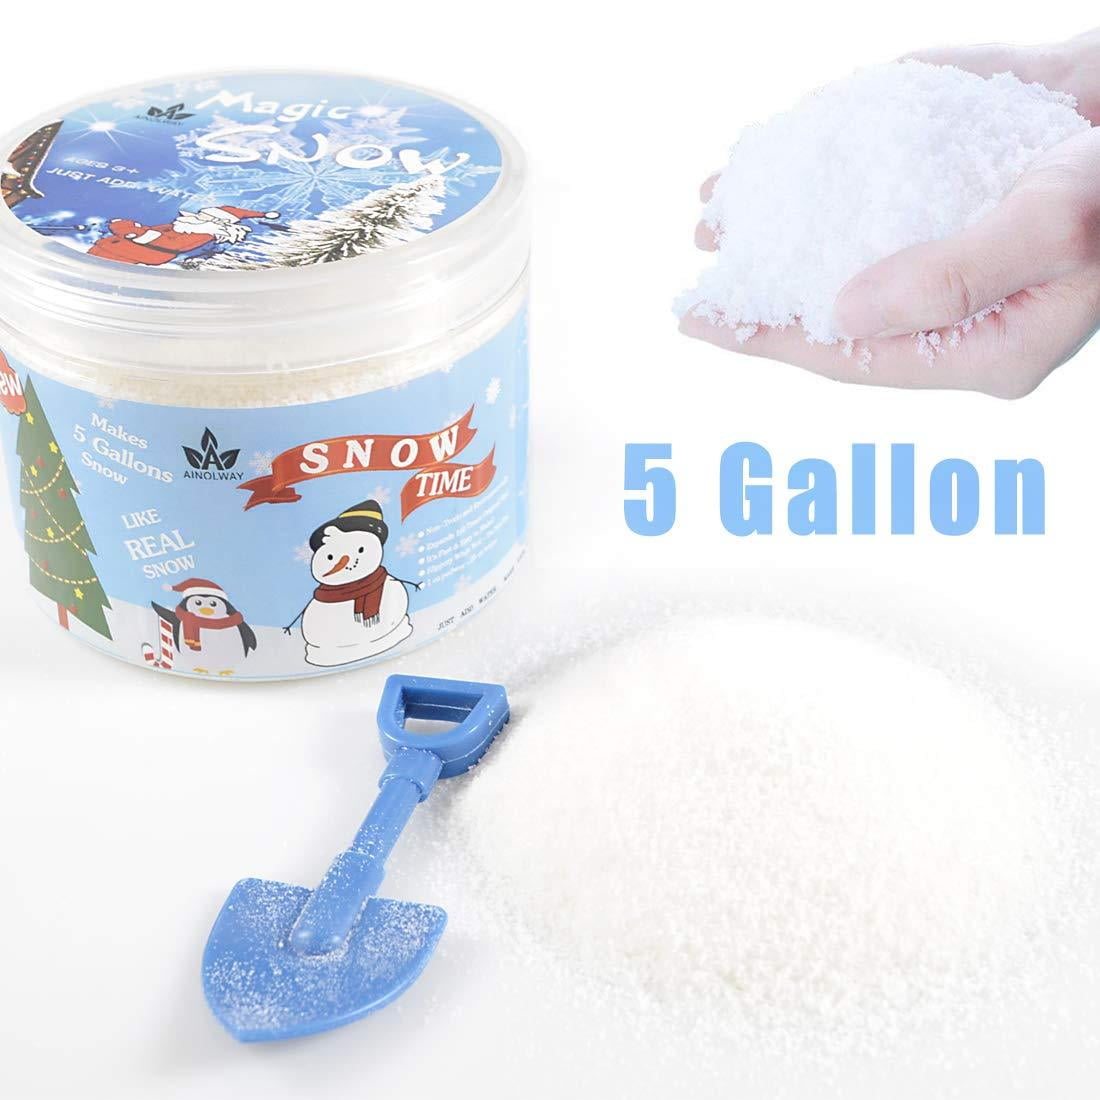 Snowonder Instant Snow Fake Artificial Snow, Also Great for Making Cloud Slime (25 Gallons)